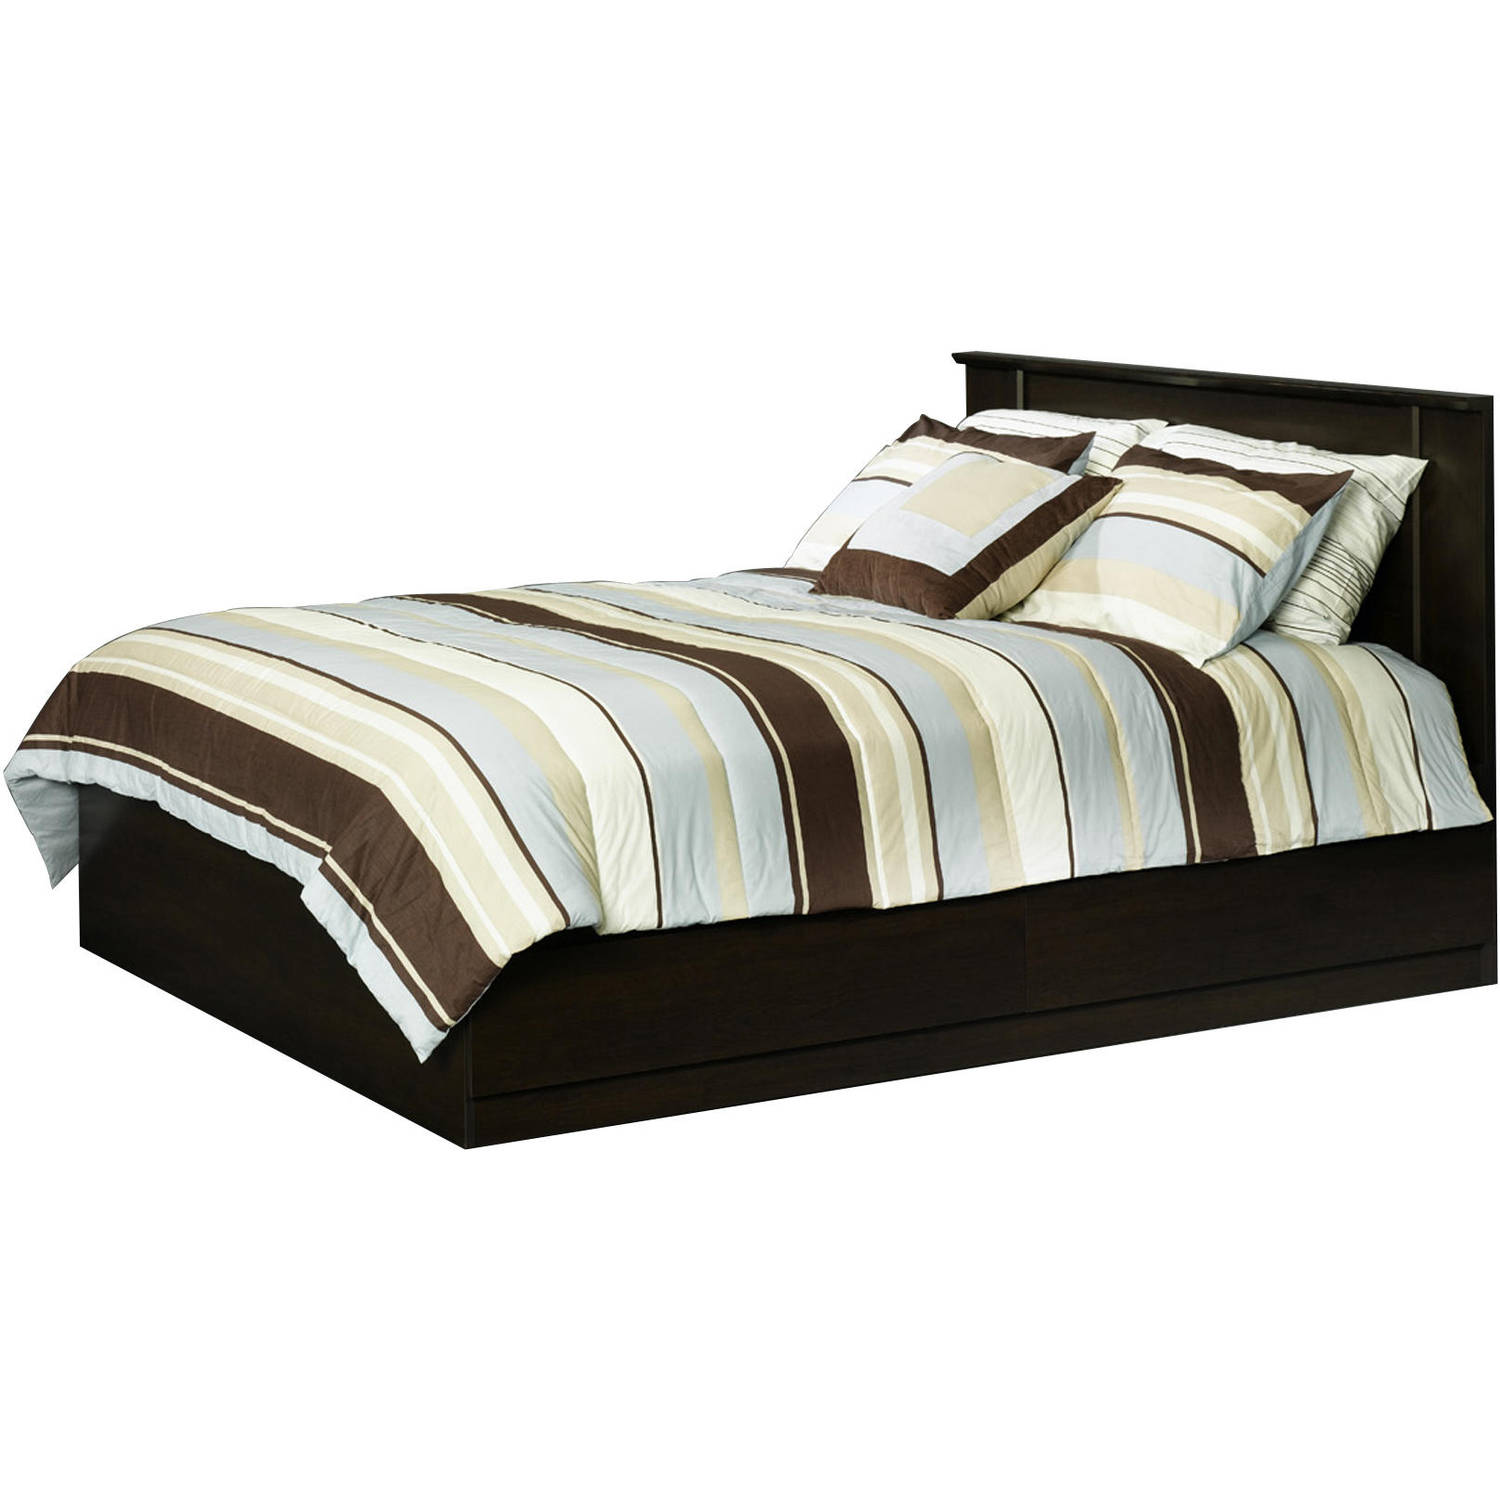 Mainstays Mates Storage Bed With, Twin Bed With Bookcase Headboard And Storage